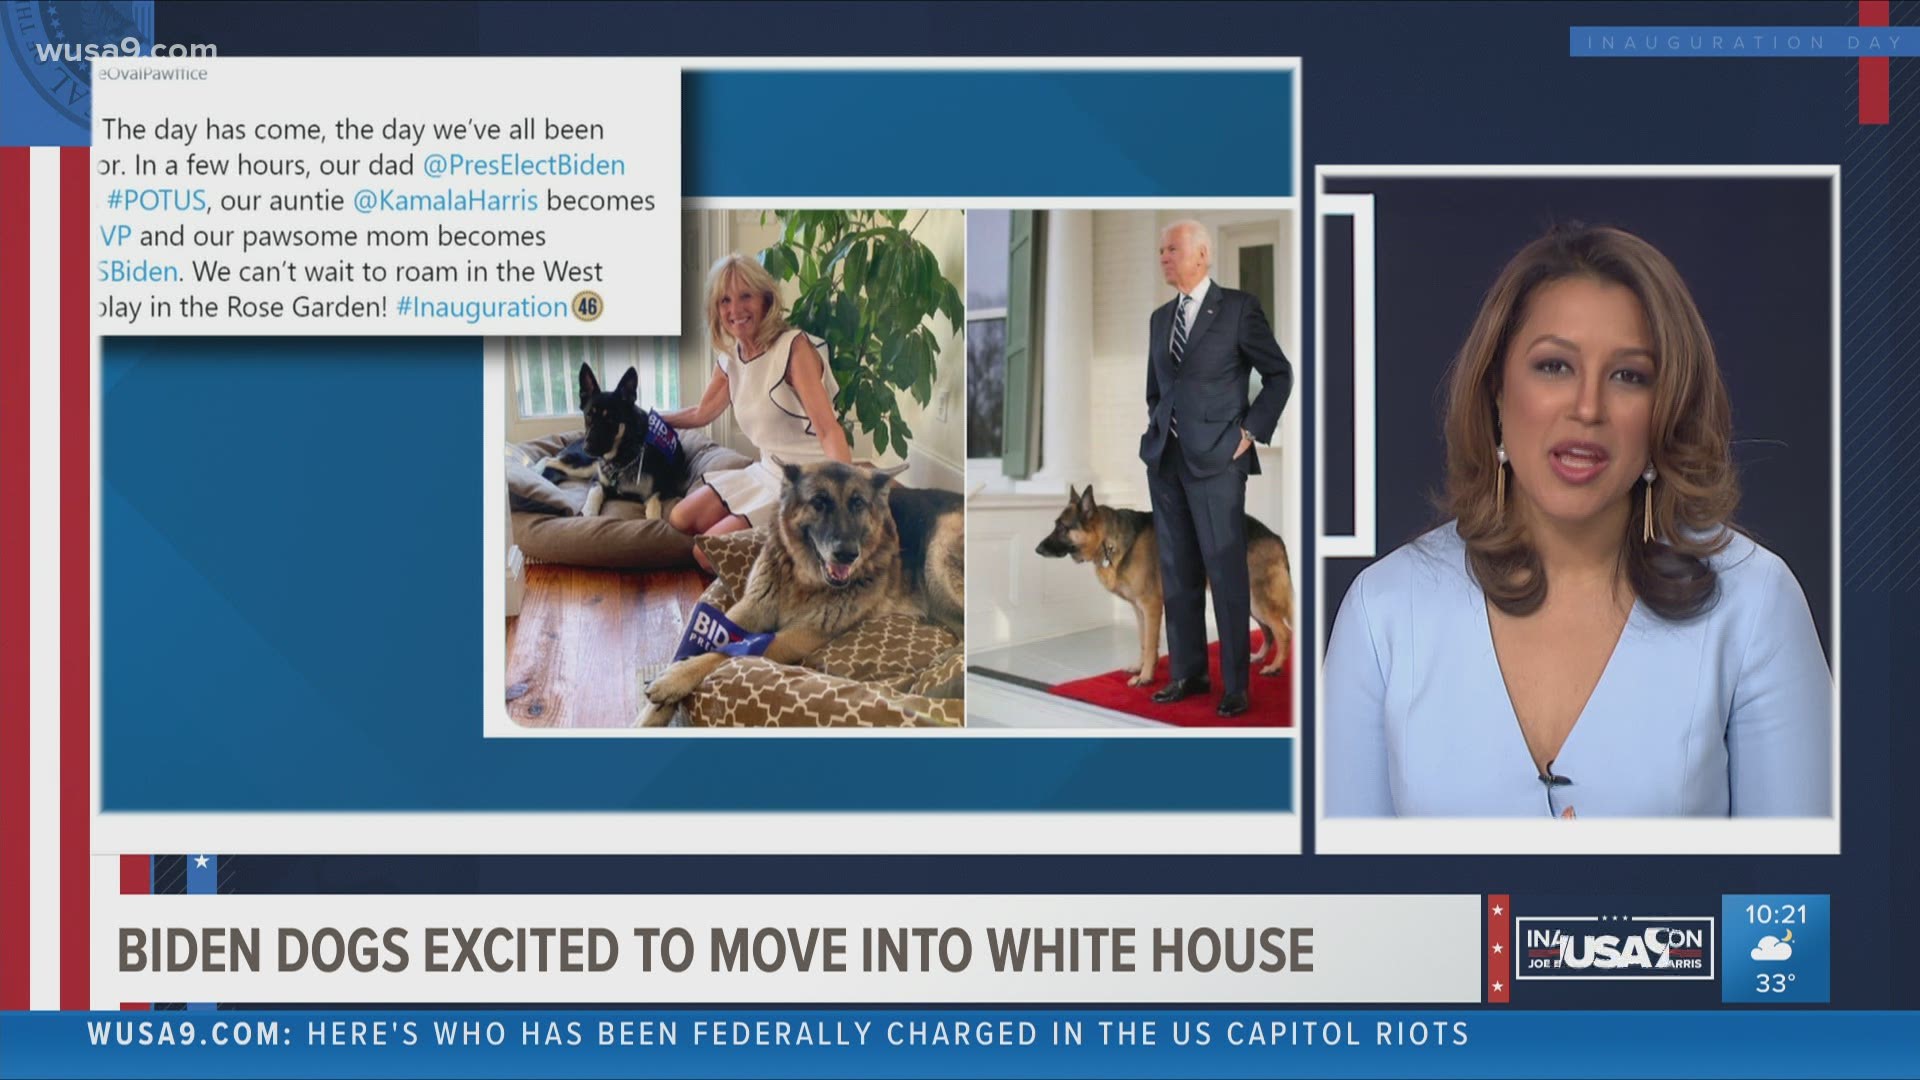 After four years of no dogs in th White House, the president and first lady will live with their two German Shepherds.